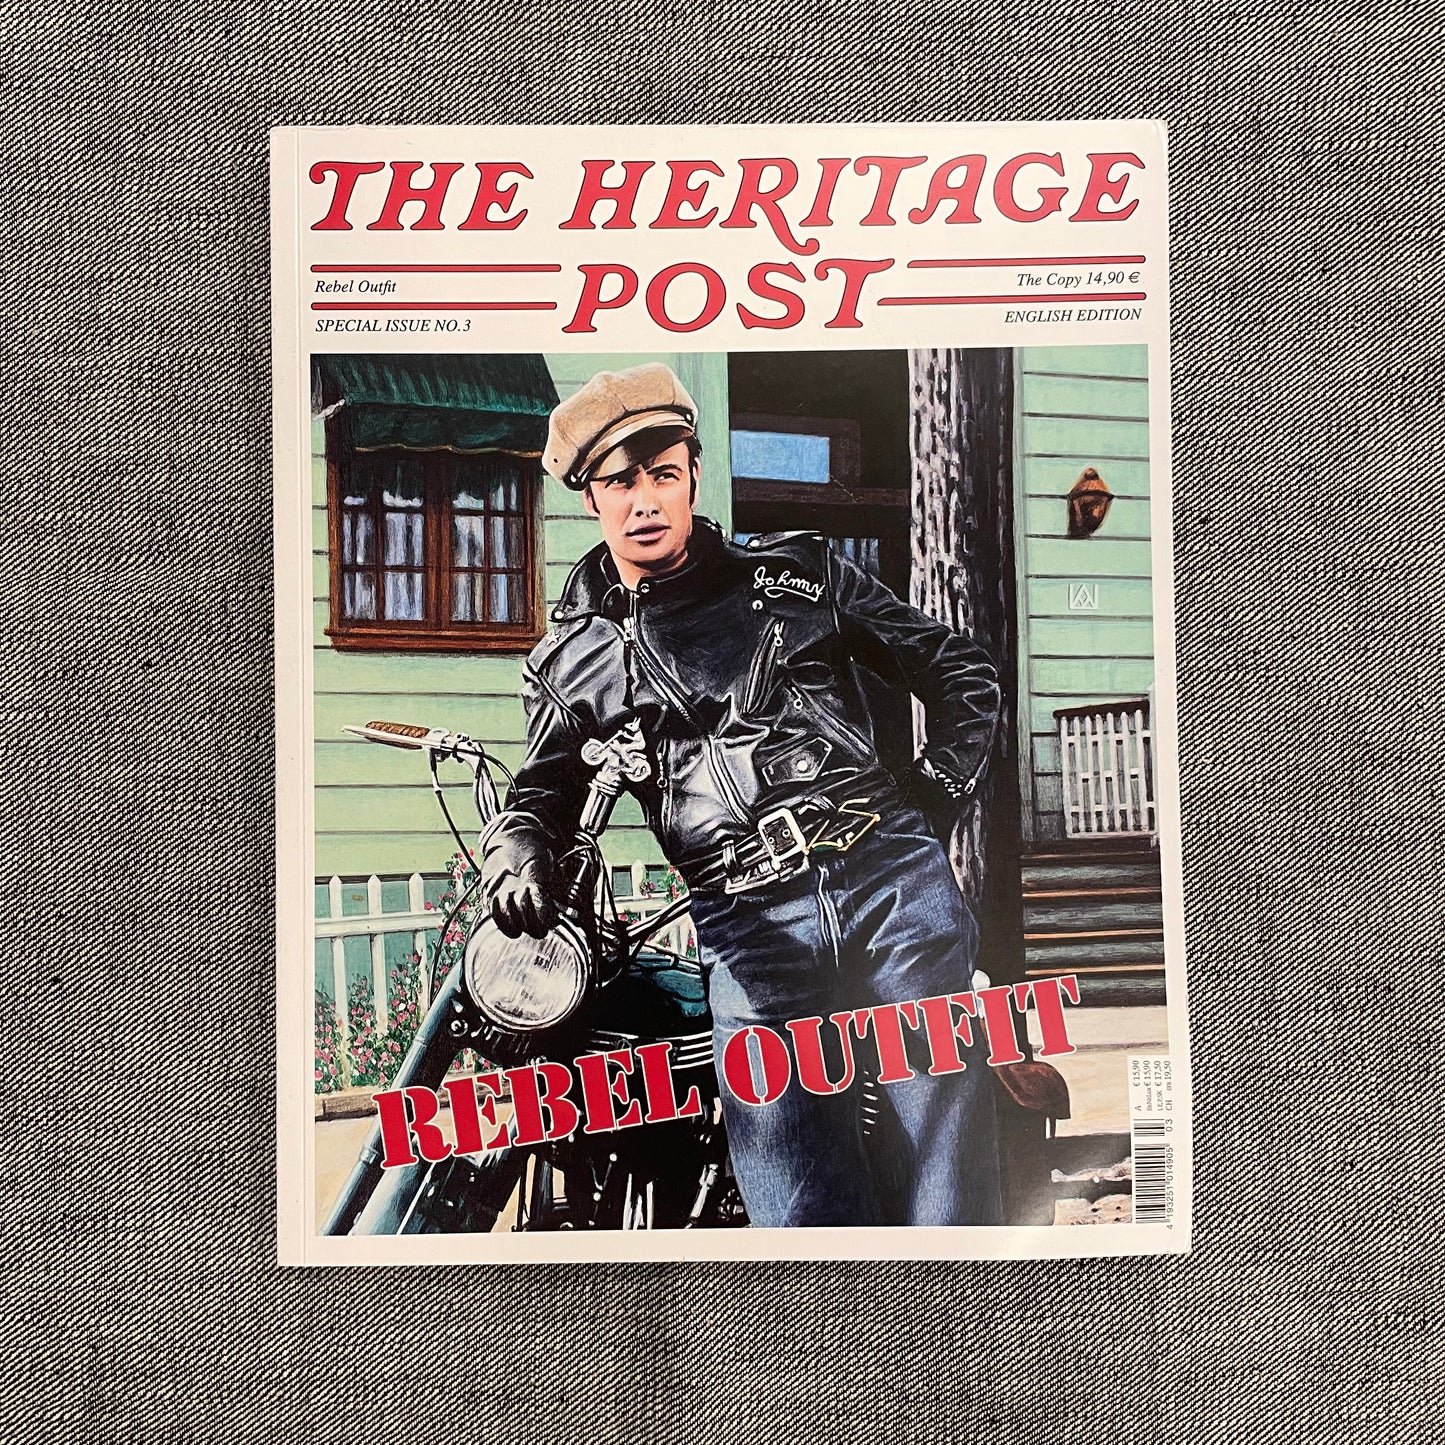 The Heritage Post - Rebel Outfit Special Issue